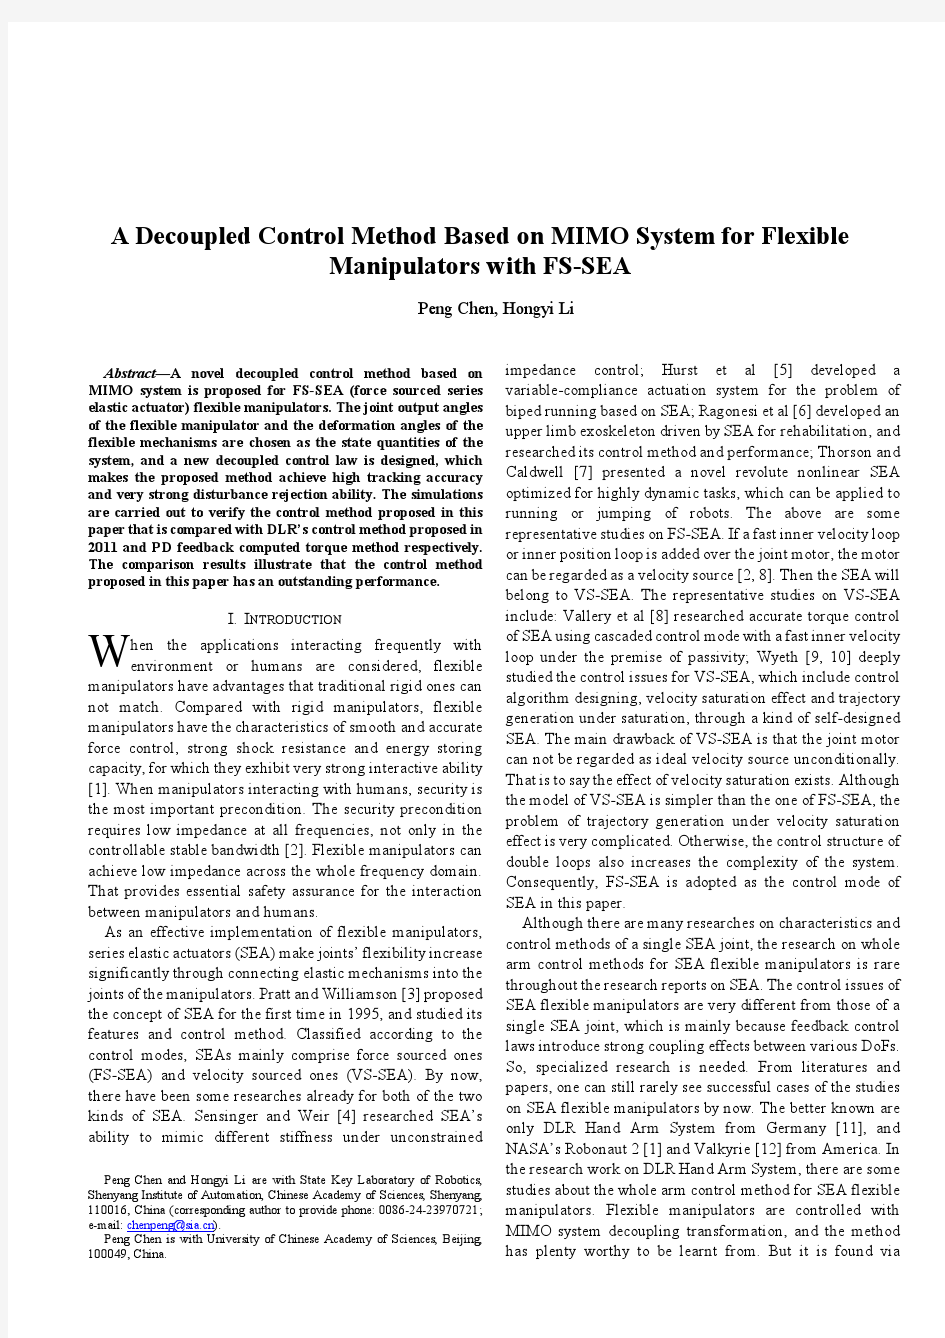 A Decoupled Control Method Based on MIMO System for Flexible Manipulators with FS-SEA (final)